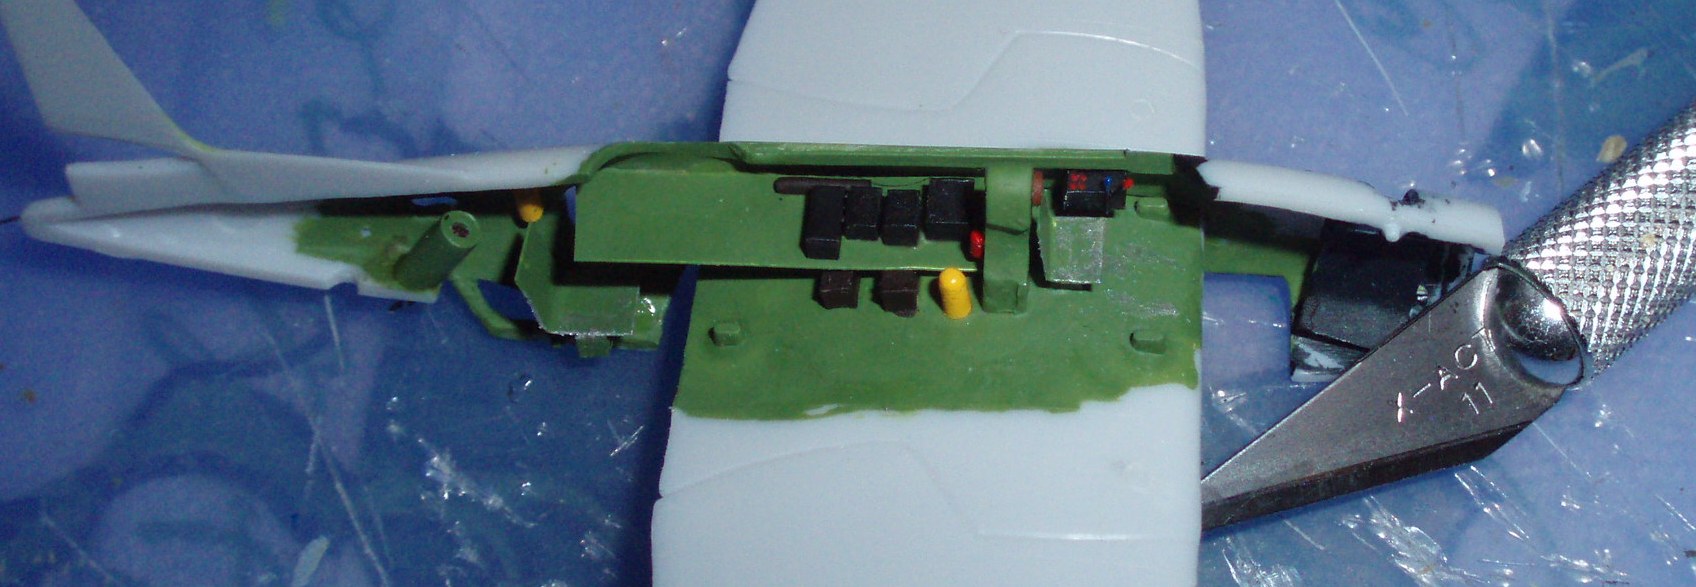 View of the left side Avenger cockpit detail with an Xacto knife blade for scale, showing, from right, cockpit details, rollover pylon, radio gear, and seat and some miscellaneous gear for the radio man.